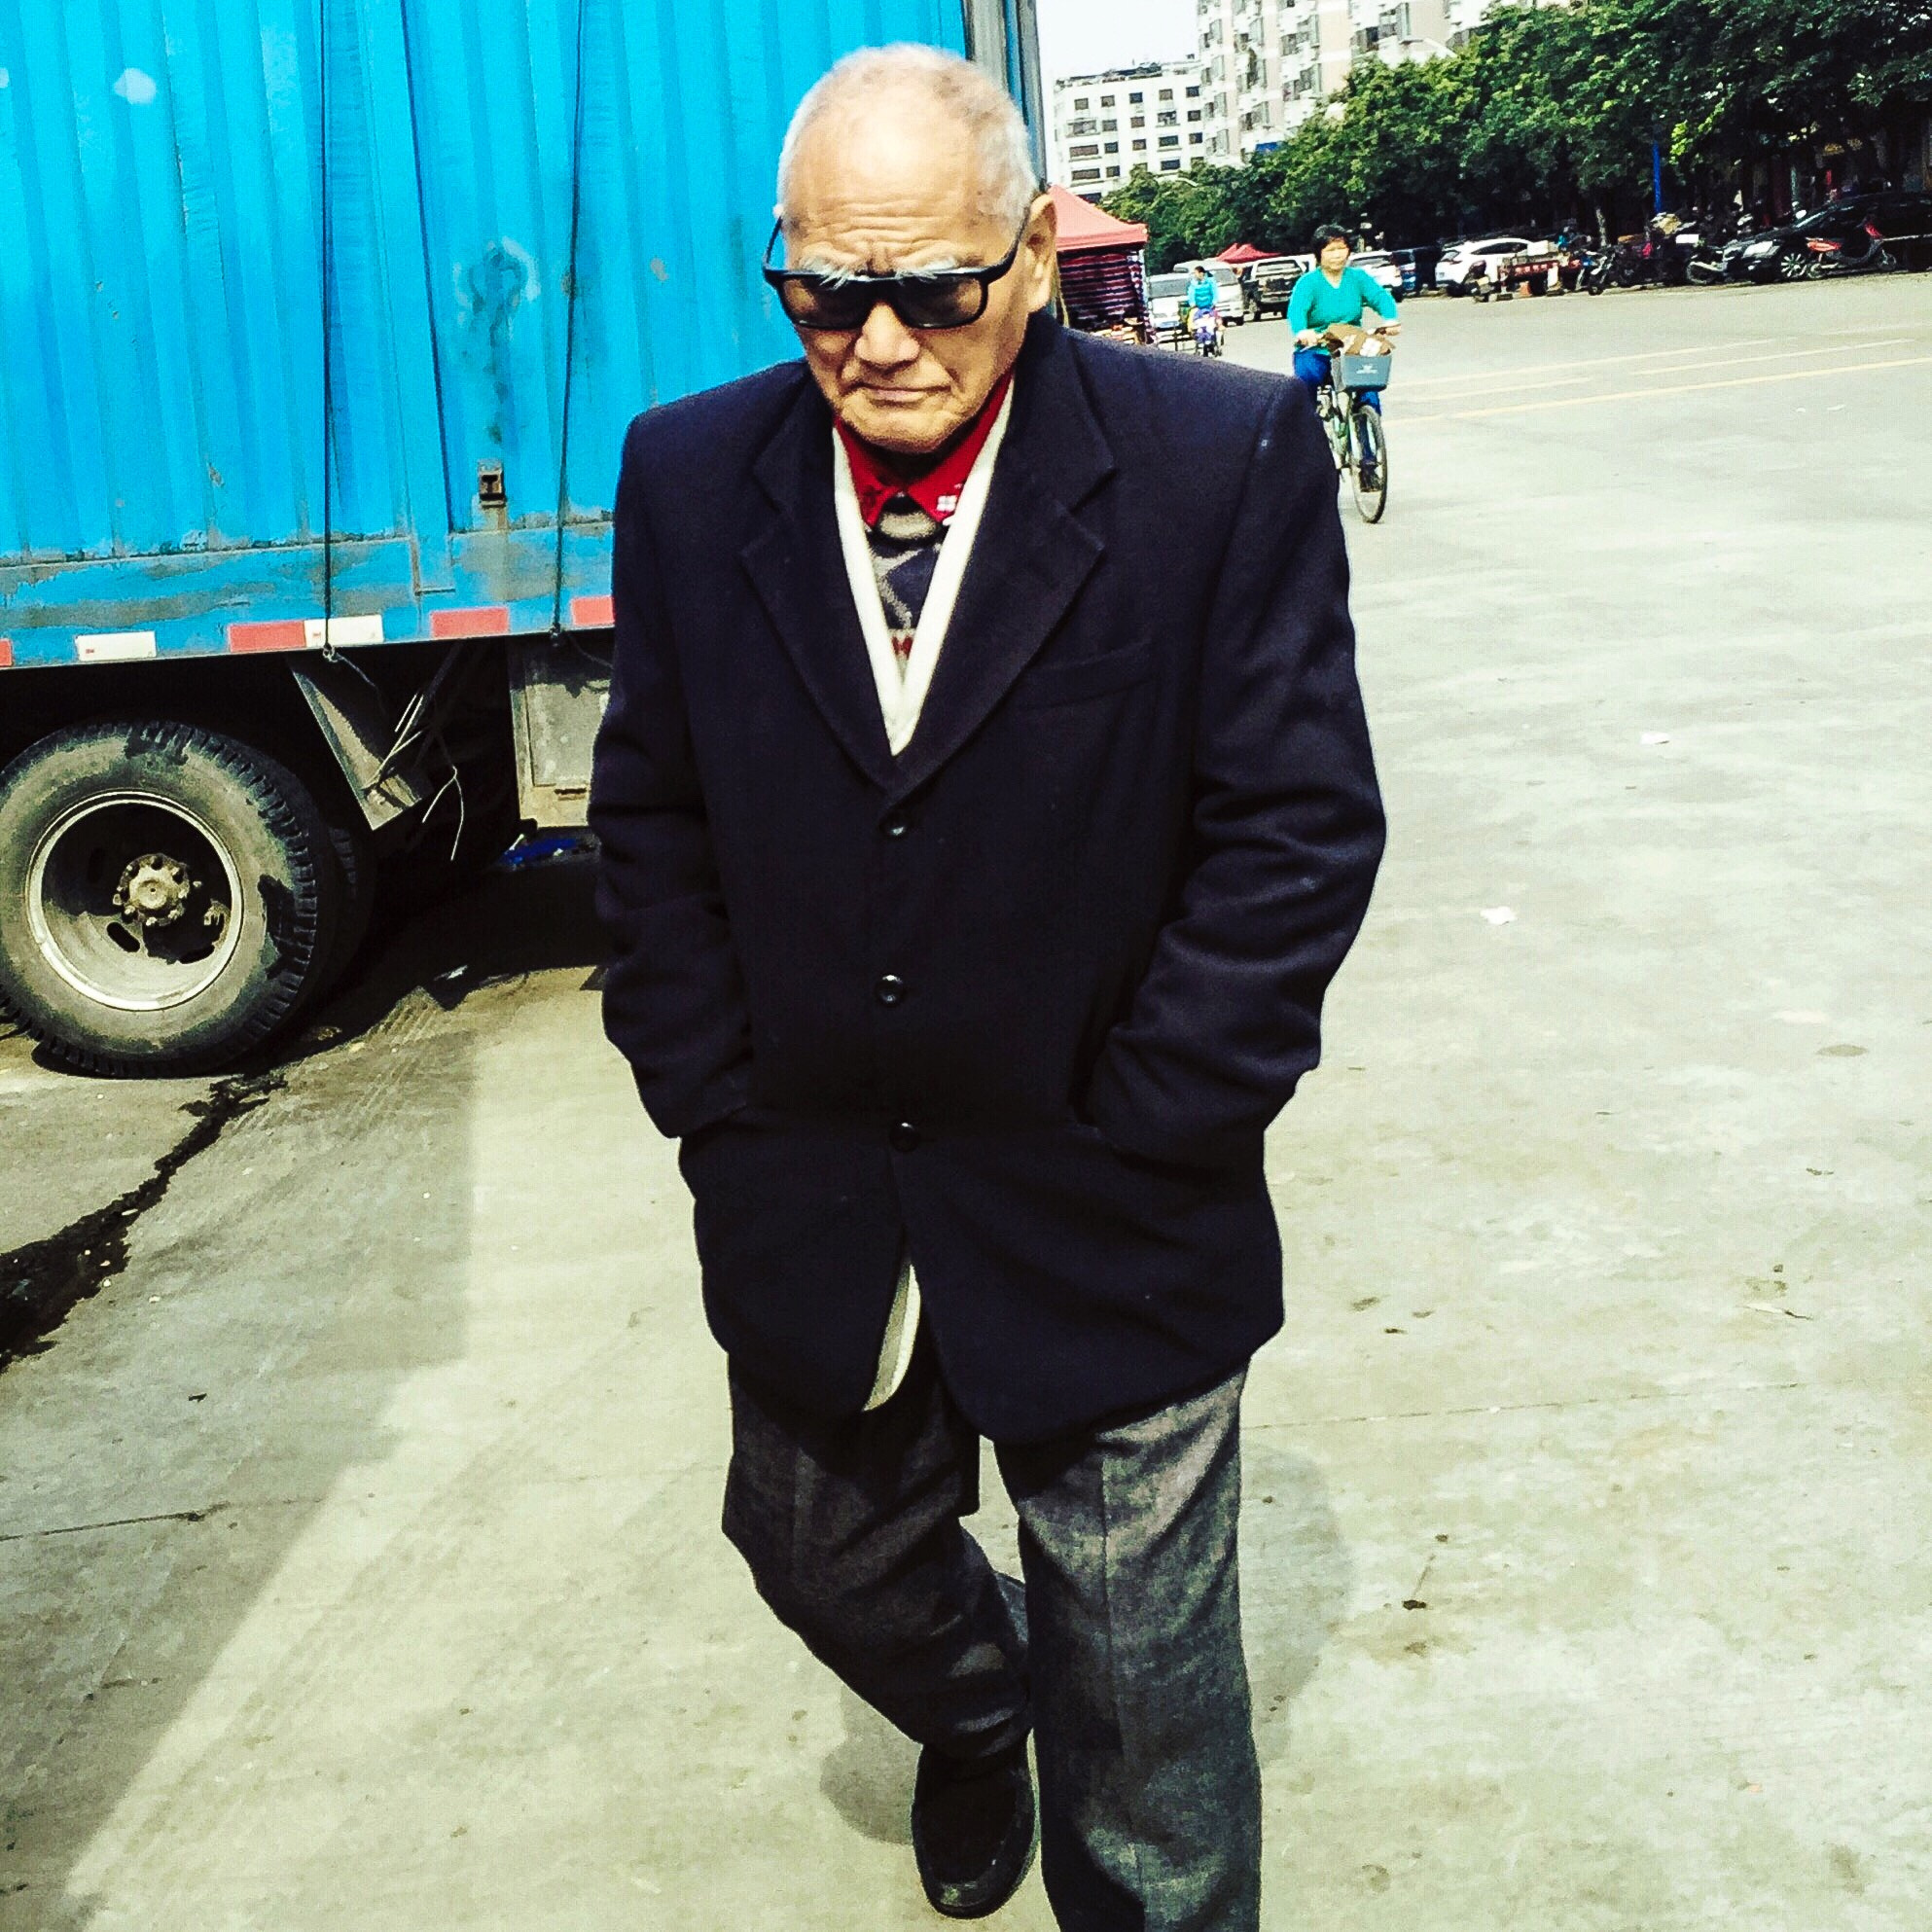 Hipstamatic 310 sample photo. A old man with sunglasses walking in a vet market photography